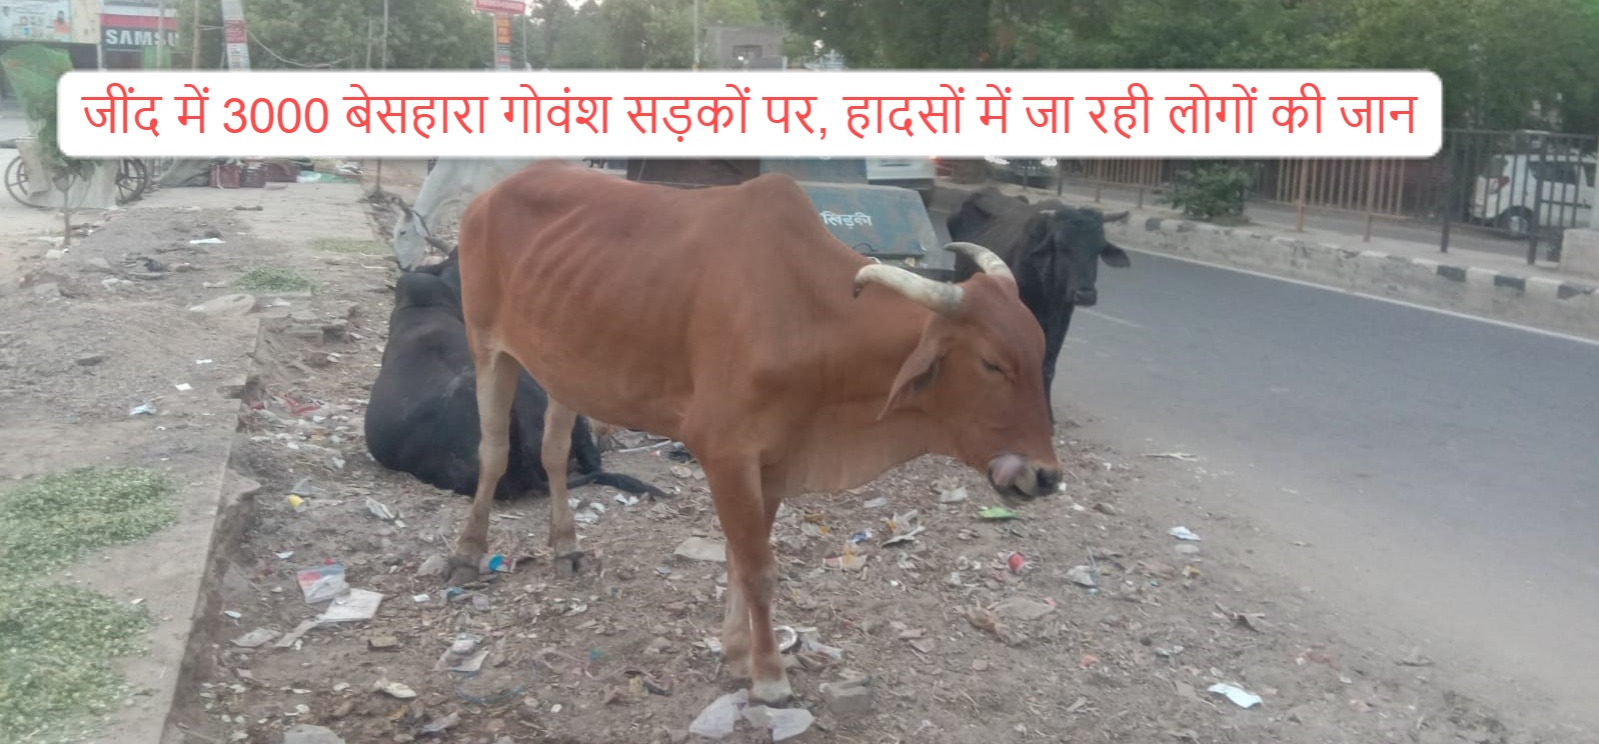 Jind news: 3000 destitute cows on the roads in Jind, people are losing their lives in accidents, destroying crops in the fields